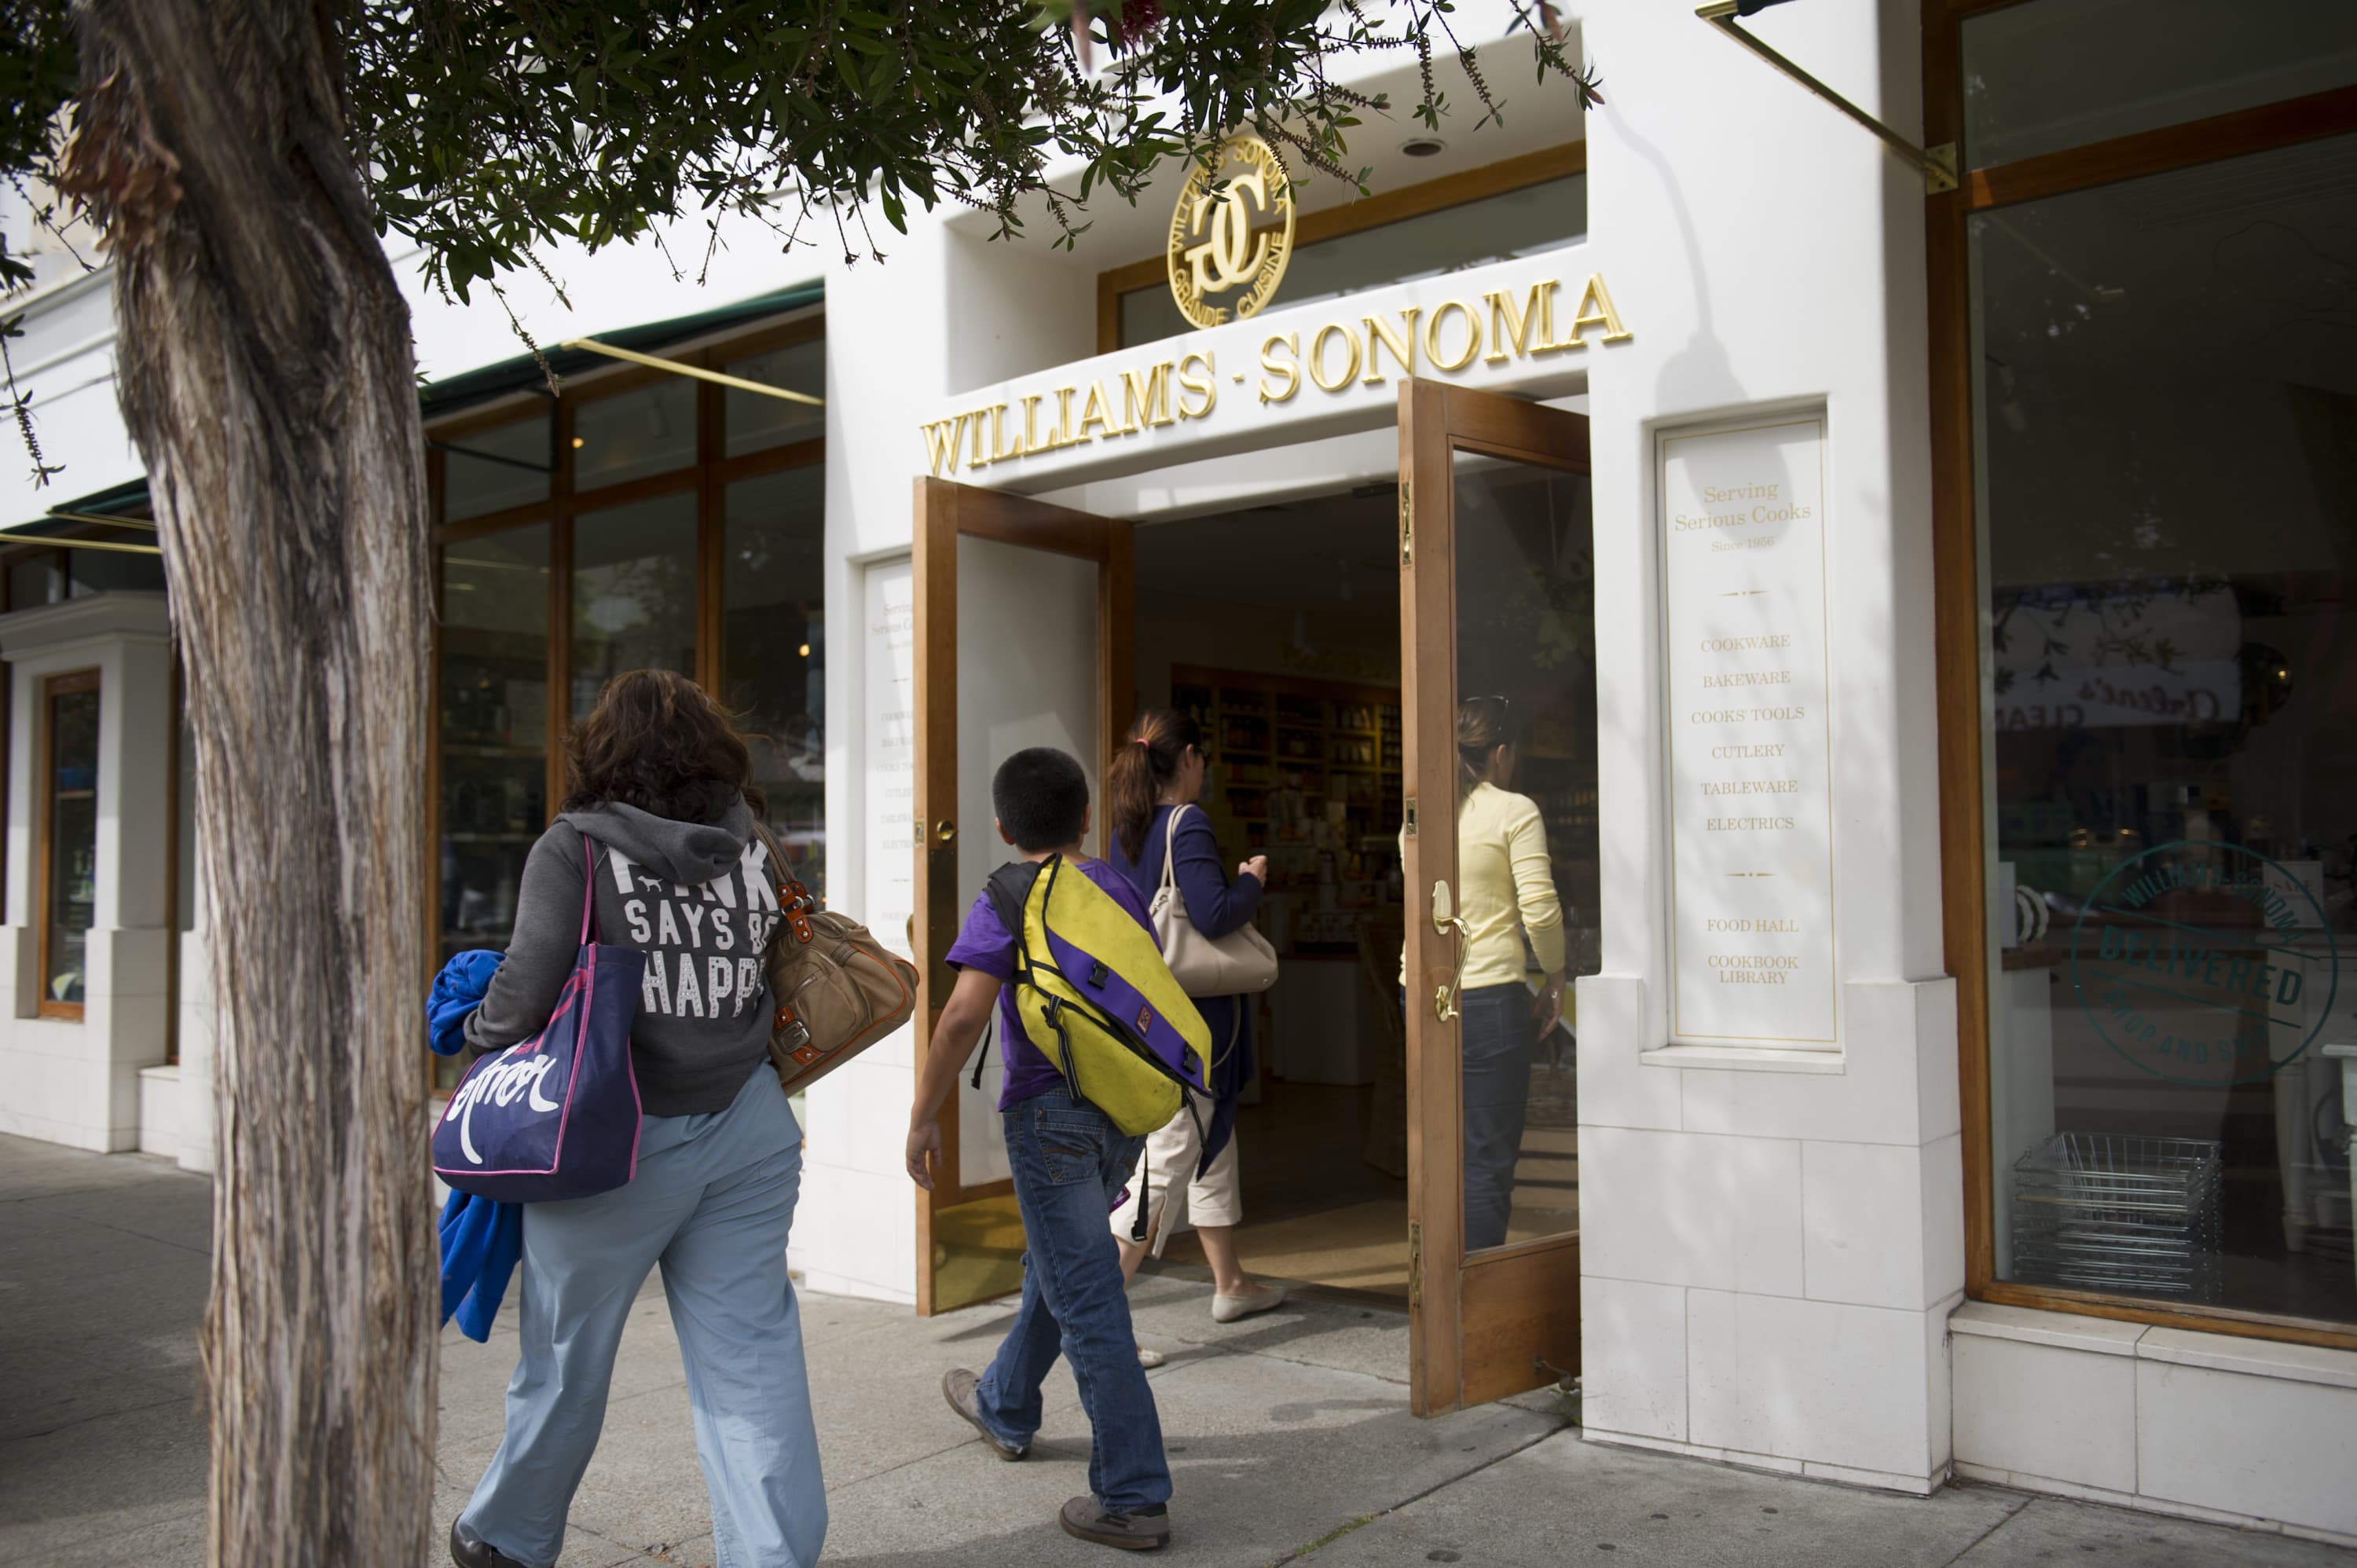 Williams-Sonoma’s earnings are boosted by stay-at-home trends and shares rise